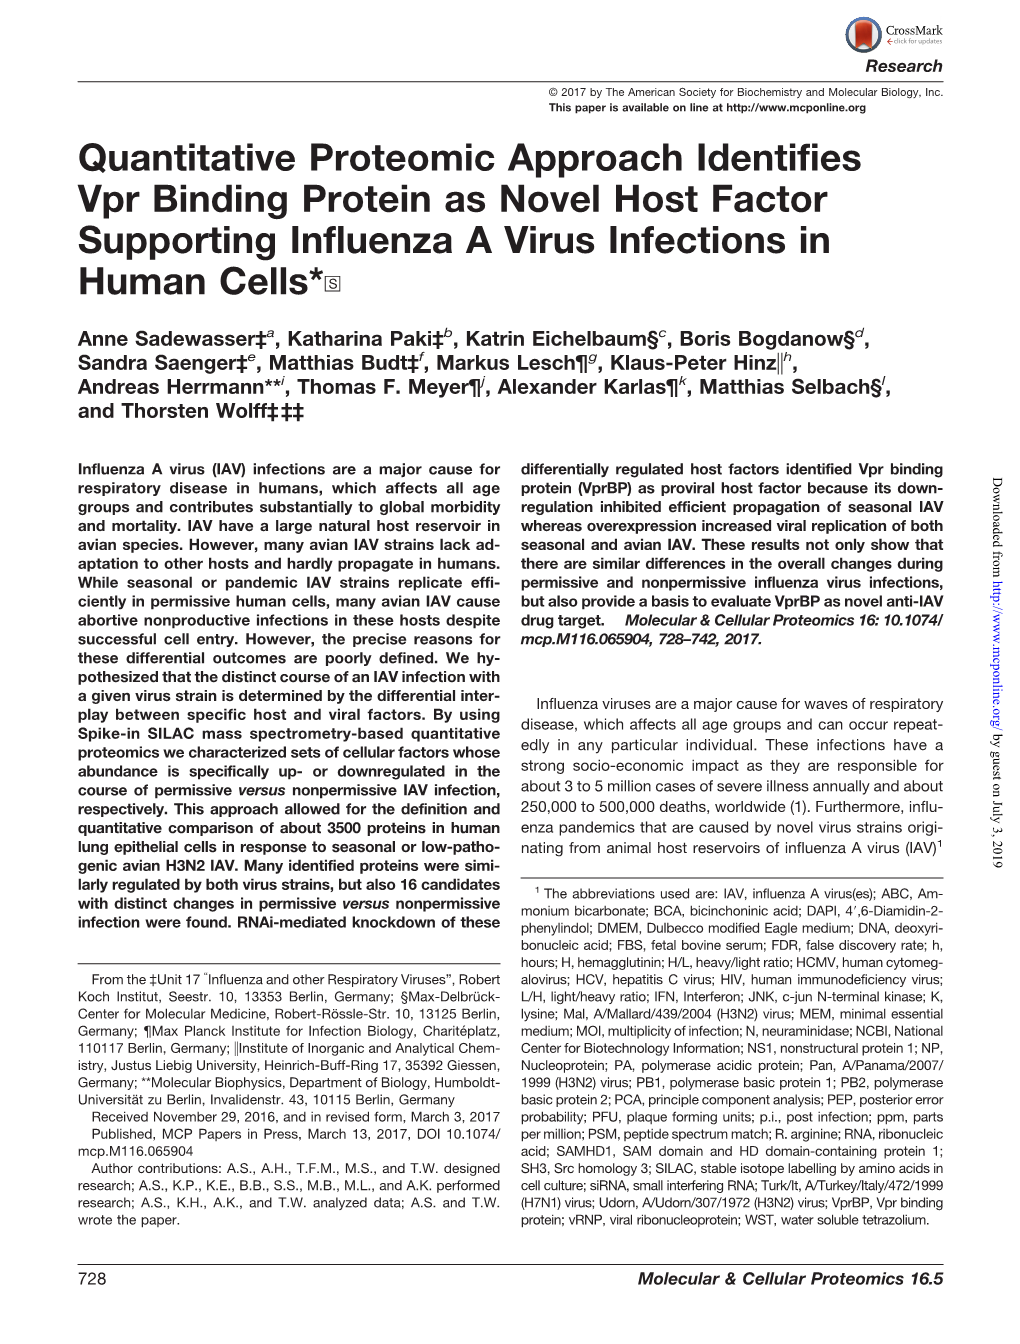 Quantitative Proteomic Approach Identifies Vpr Binding Protein As Novel Host Factor Supporting Influenza a Virus Infections in Human Cells*□S